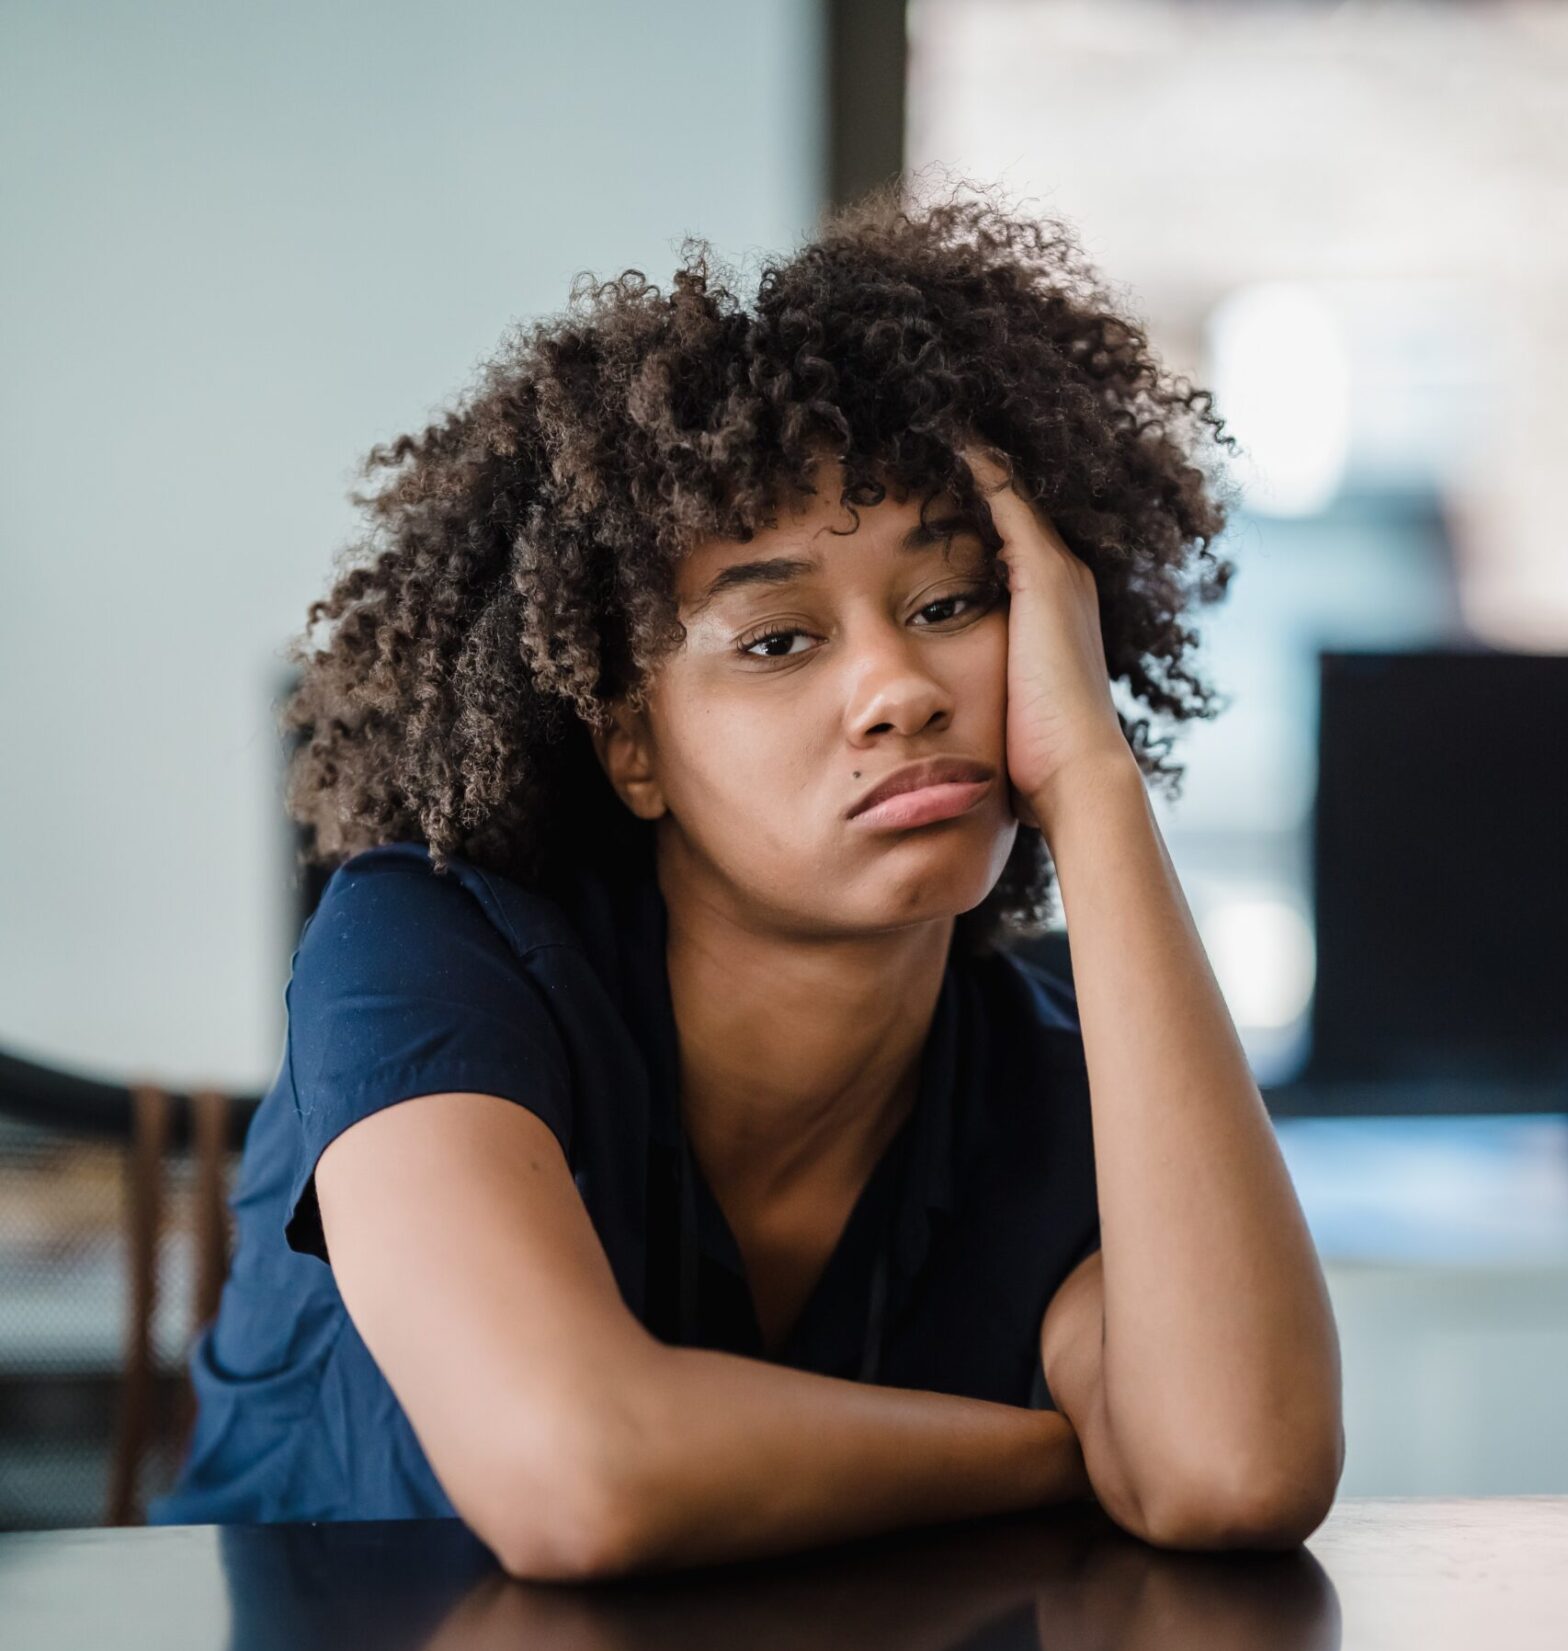 A young Black woman with a bored look on her face. If you are bored and need to know what to do, here are a few ideas.